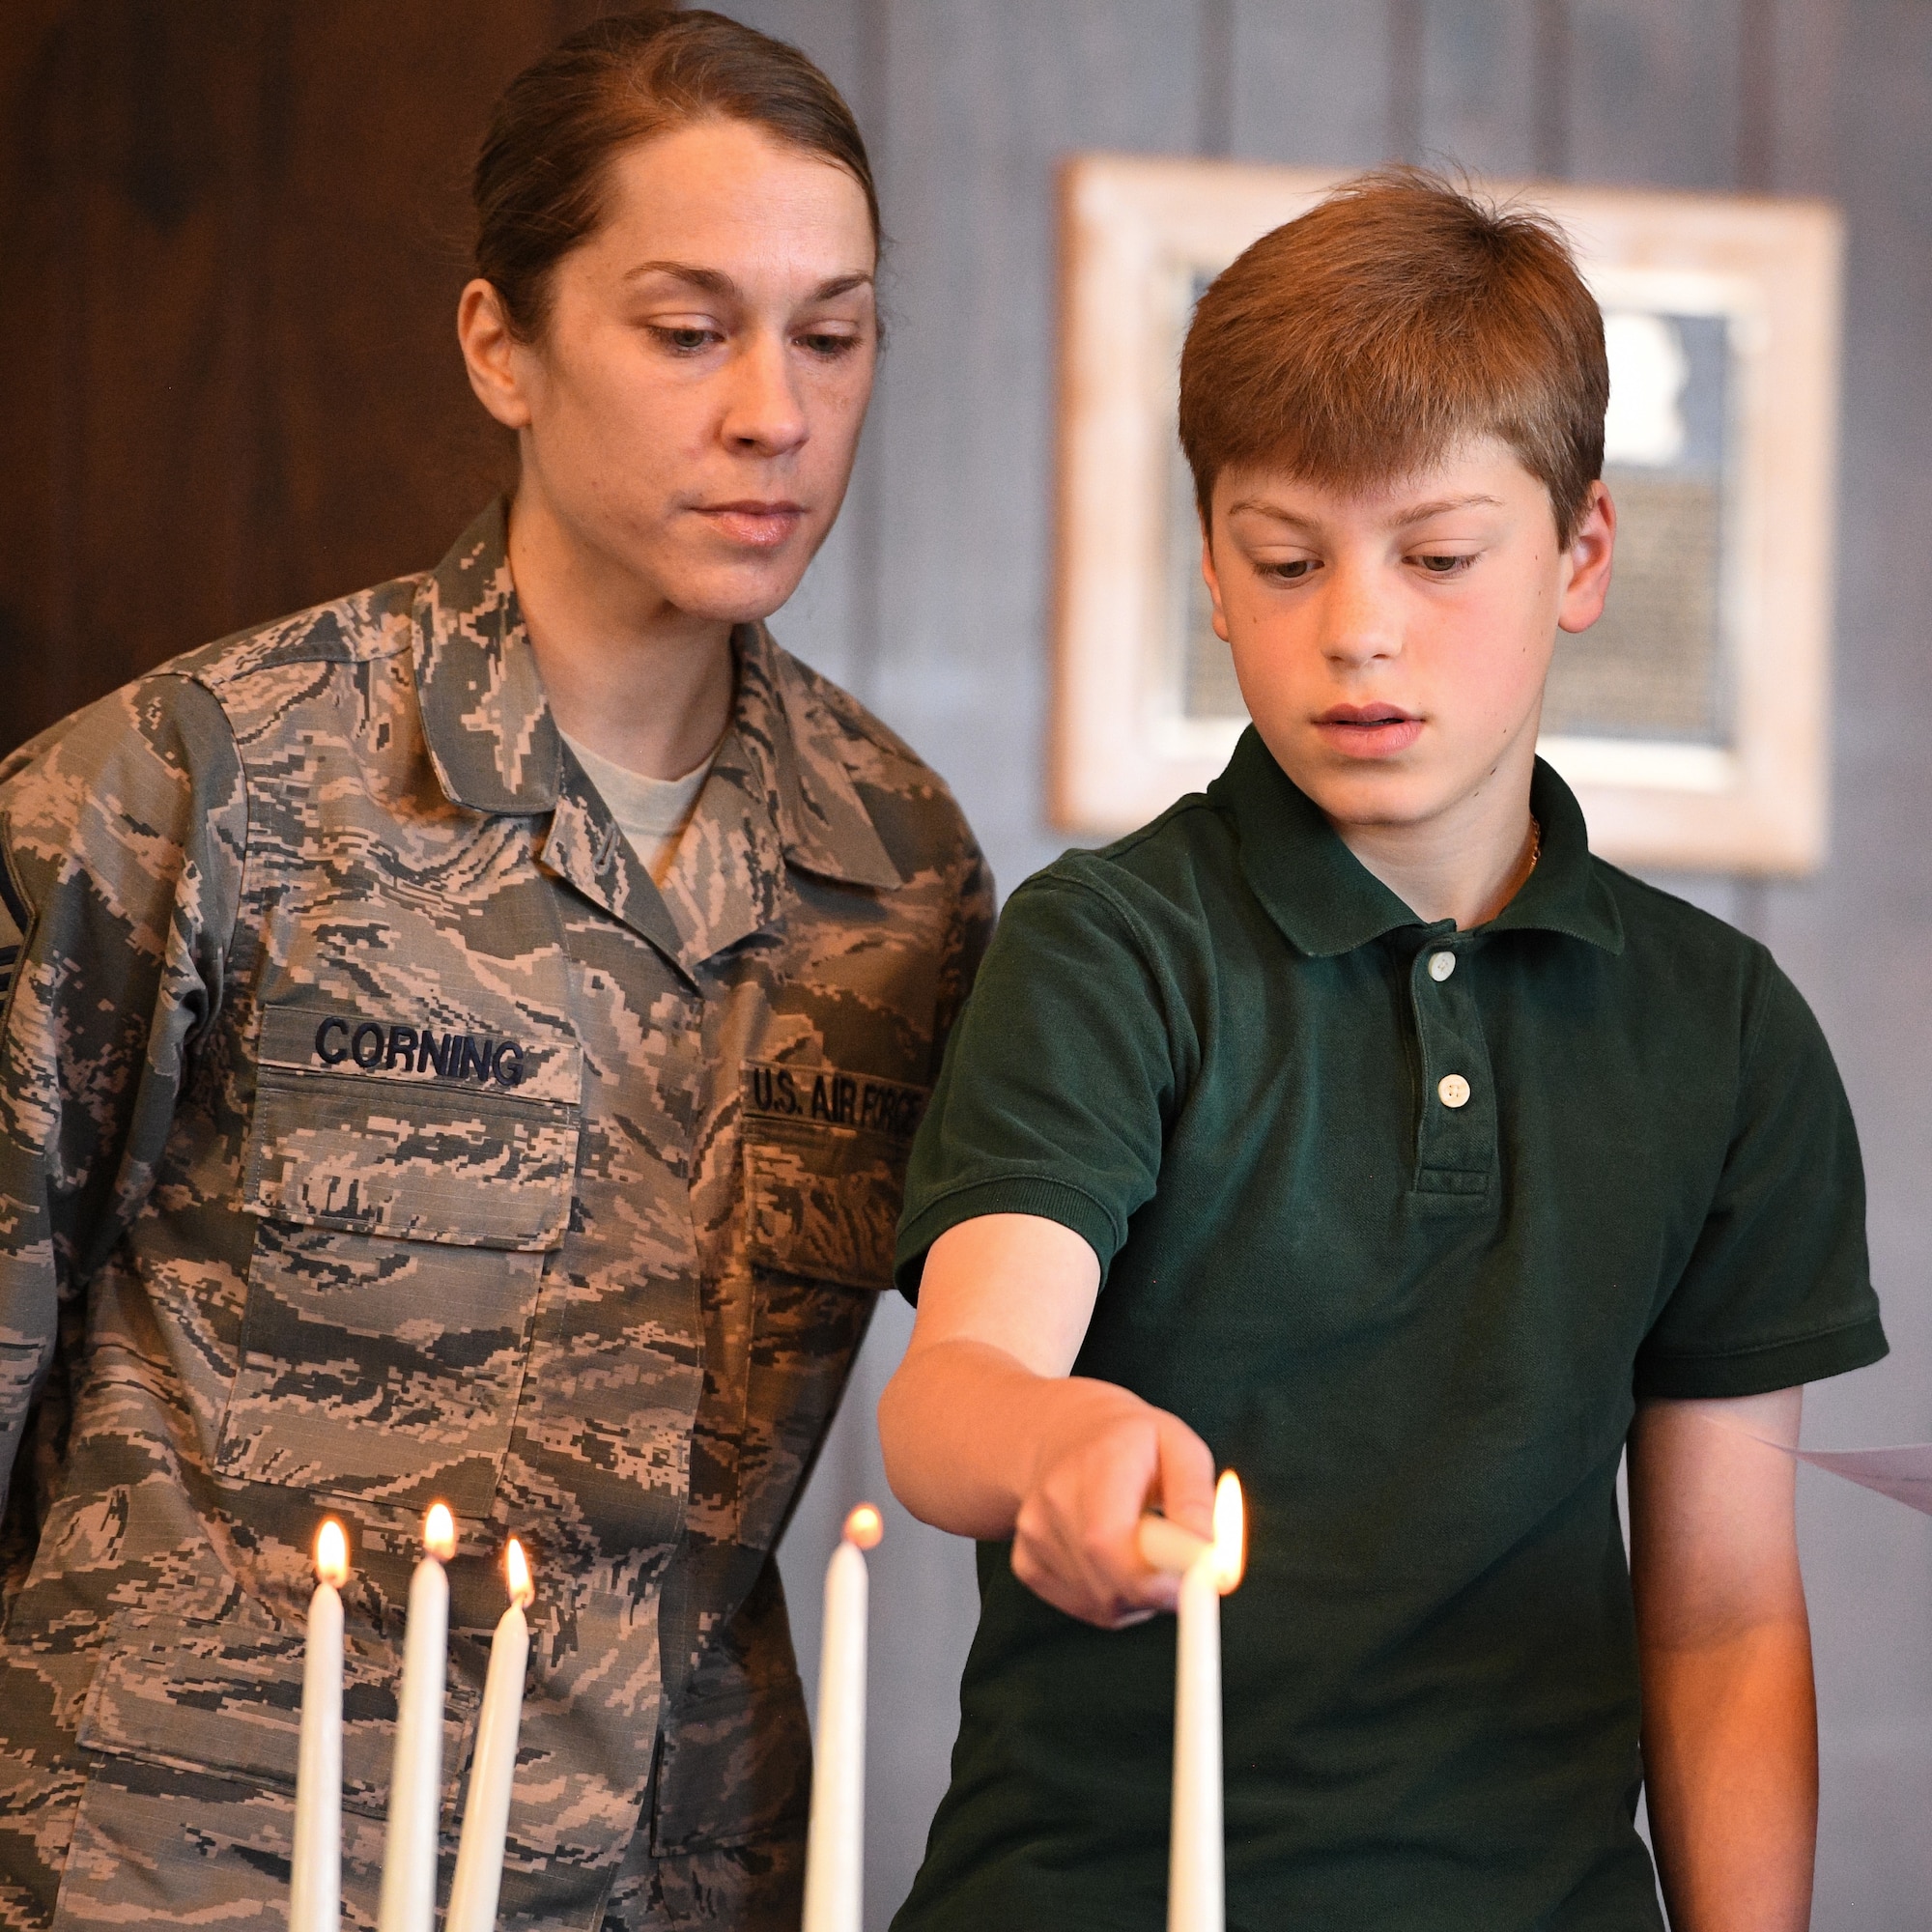 Evan Corning lights candles alongside his mother, Master Sgt. Michele Corning, during the Holocaust Days of Remembrance Service April 18, 2018, at Hill Air Force Base, Utah. The event's guest speaker was Diane Warsoff, a resident of Utah and second-generation Holocaust survivor. (U.S. Air Force photo by R. Nial Bradshaw)